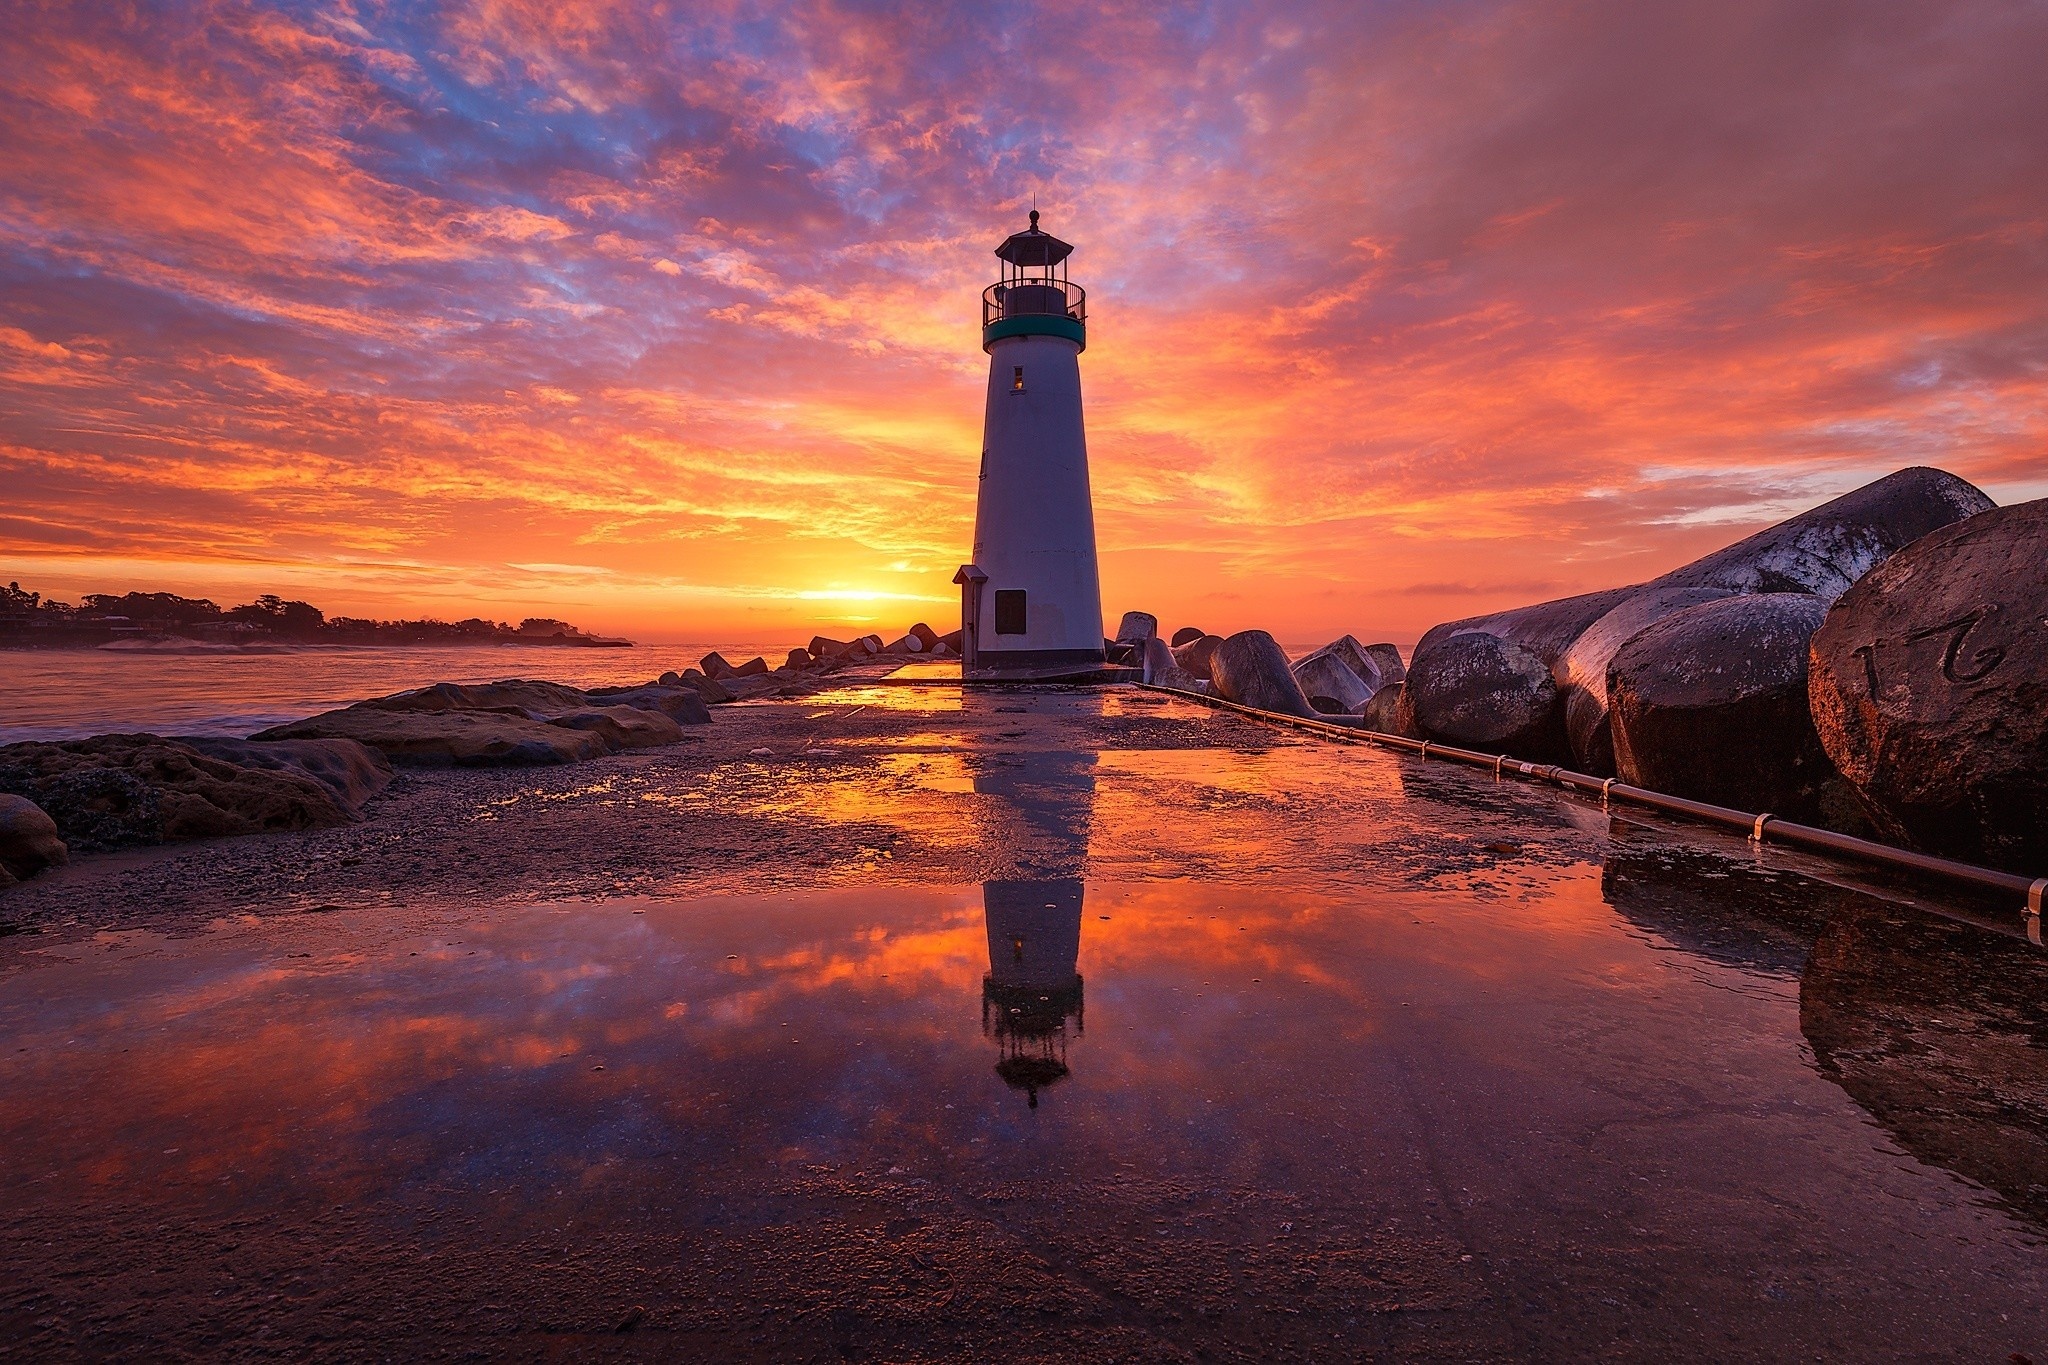 Lighthouse beauty, Spectacular tower, Seaside enchantment, Majestic view, 2050x1370 HD Desktop